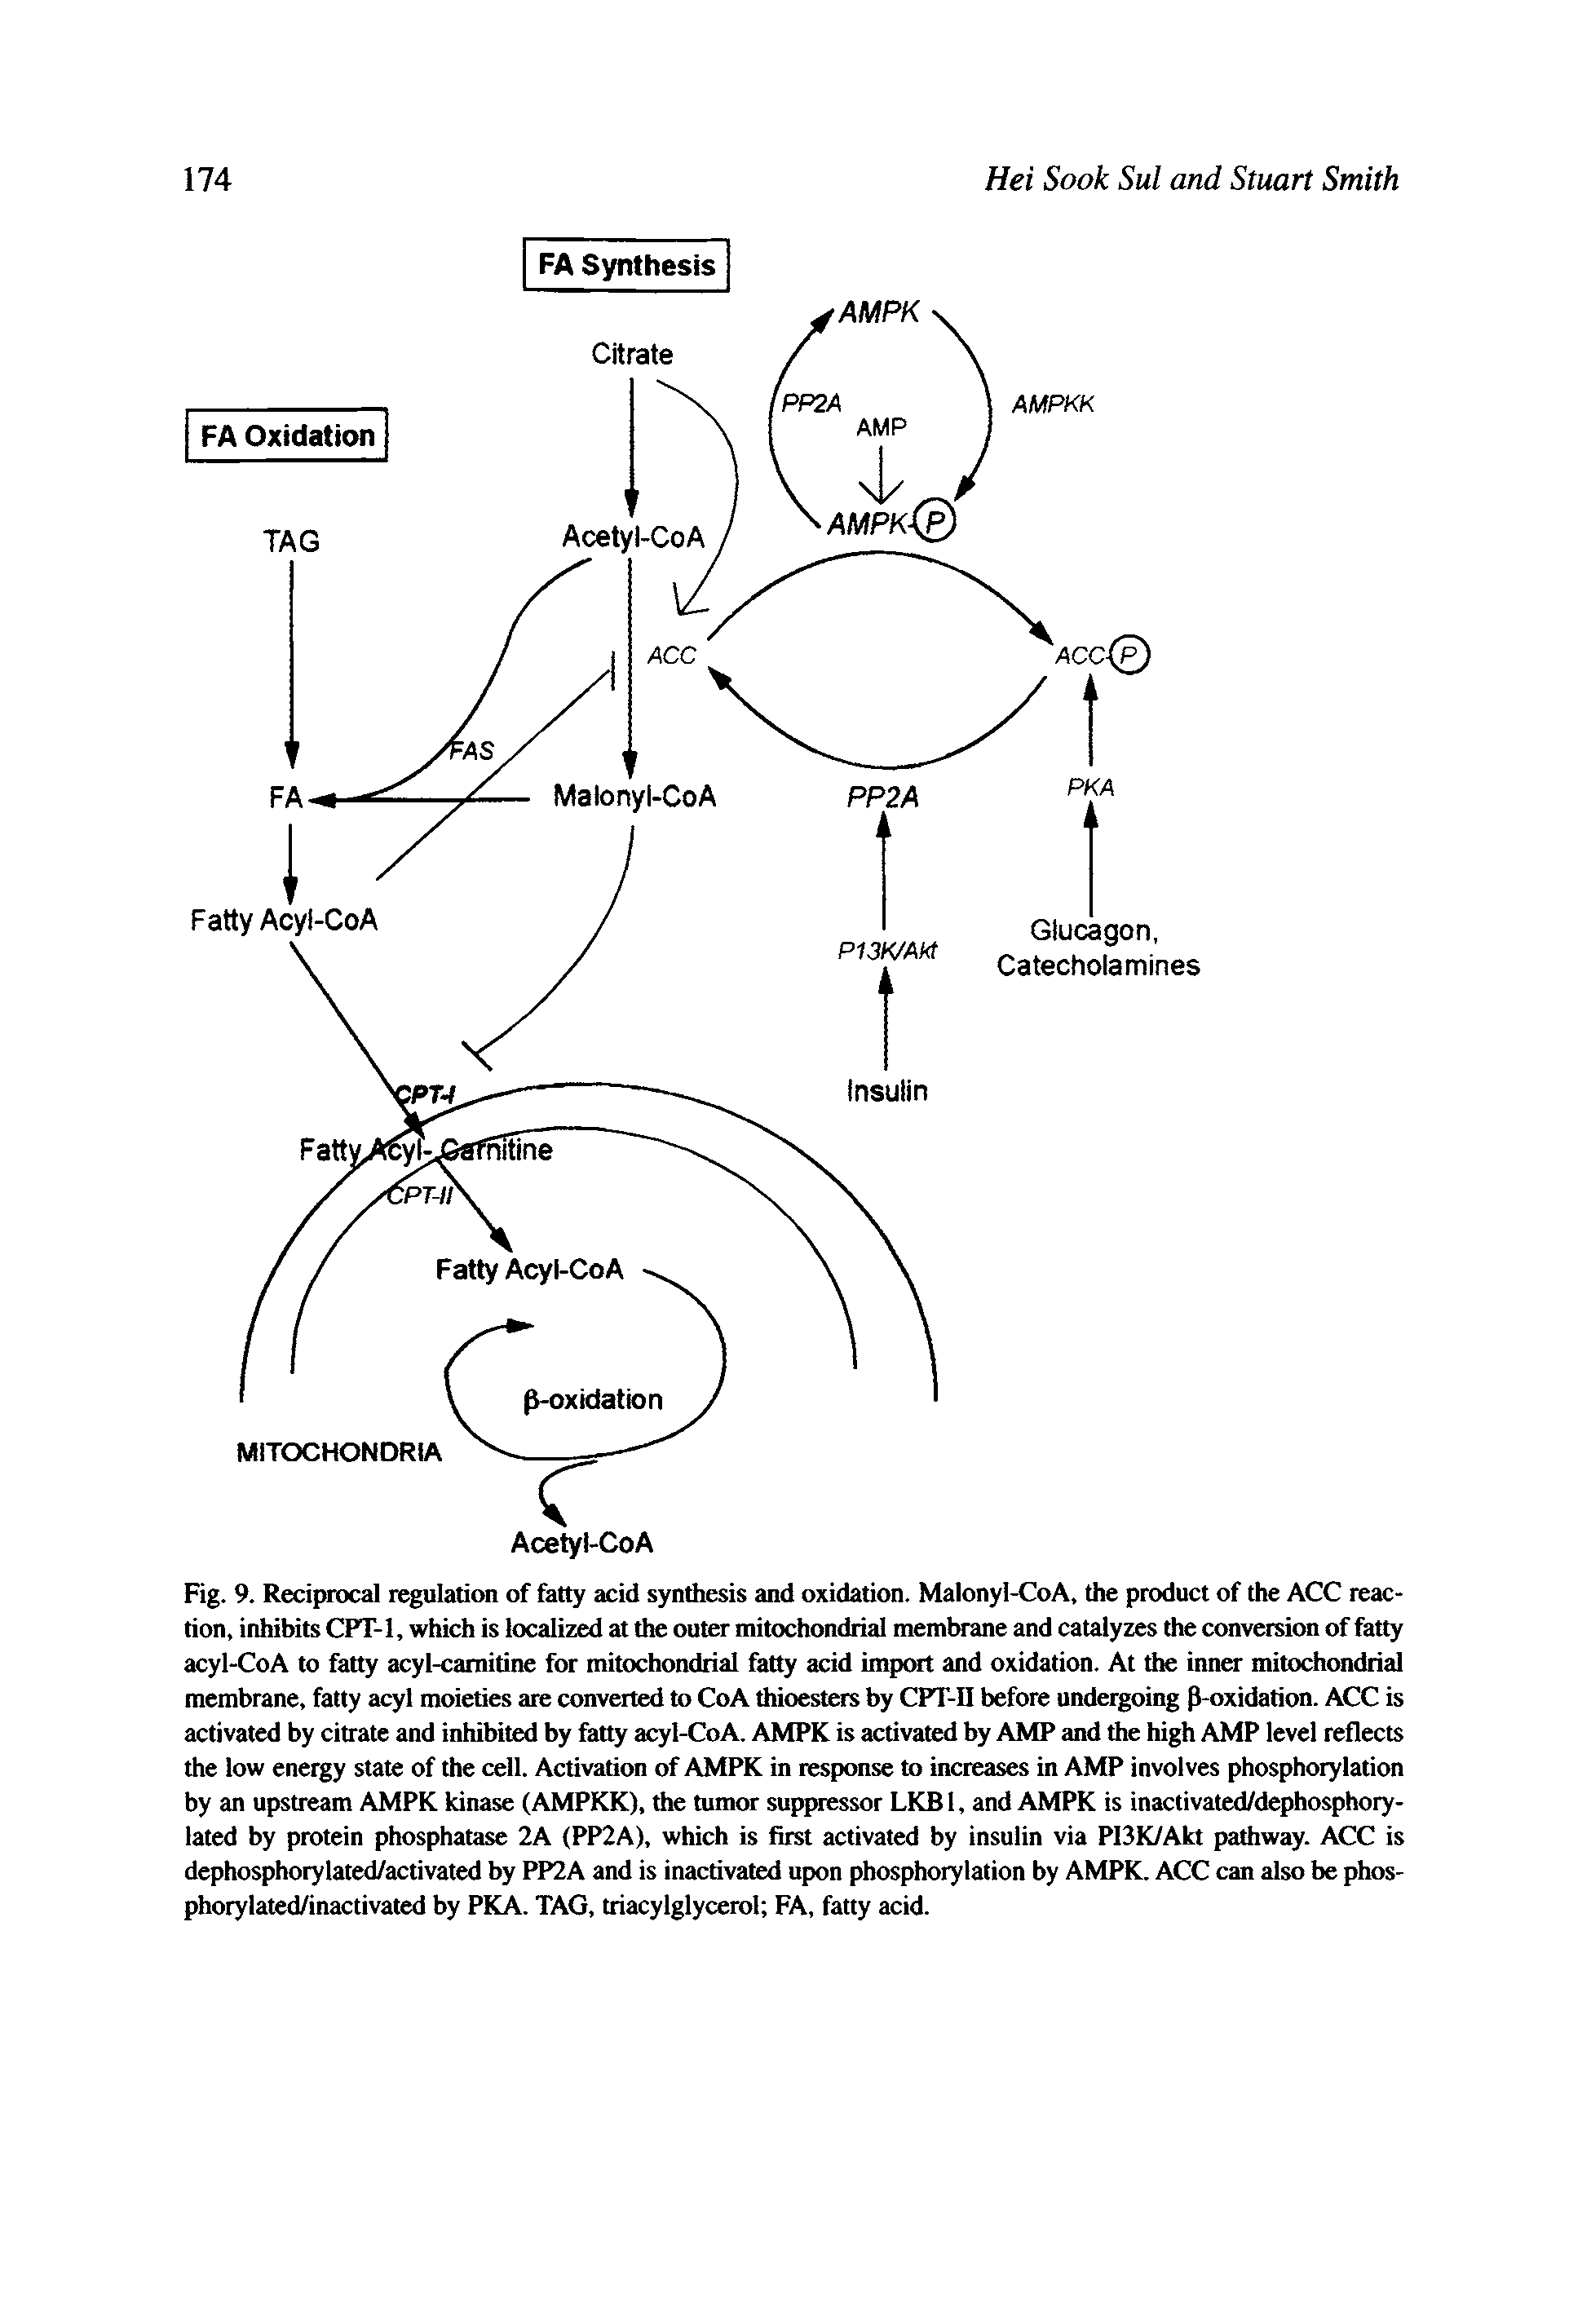 Fig. 9. Reciprocal regulation of fatty acid synthesis and oxidation. Malonyl-CoA, the product of the ACC reaction, inhibits CPT-1, which is localized at the outer mitochondrial membrane and catalyzes the conversion of fatty acyl-CoA to fatty acyl-camitine for mitochondrial fatty acid import and oxidation. At the inner mitochondrial membrane, fatty acyl moieties are converted to CoA thioesters by CPT-II before undergoing -oxidation. ACC is activated by citrate and inhibited by fatty acyl-CoA. AMPK is activated by AMP and the high AMP level reflects the low energy state of the cell. Activation of AMPK in response to increases in AMP involves phosphorylation by an upstream AMPK kinase (AMPKK), the tumor suppressor LKB1, and AMPK is inactivated/dephosphory-lated by protein phosphatase 2A (PP2A), which is first activated by insulin via PI3K/Akt pathway. ACC is dephosphorylated/activated by PP2A and is inactivated upon phosphorylation by AMPK. ACC can also be phos-phorylated/inactivated by PKA. TAG, triacylglycerol FA, fatty acid.